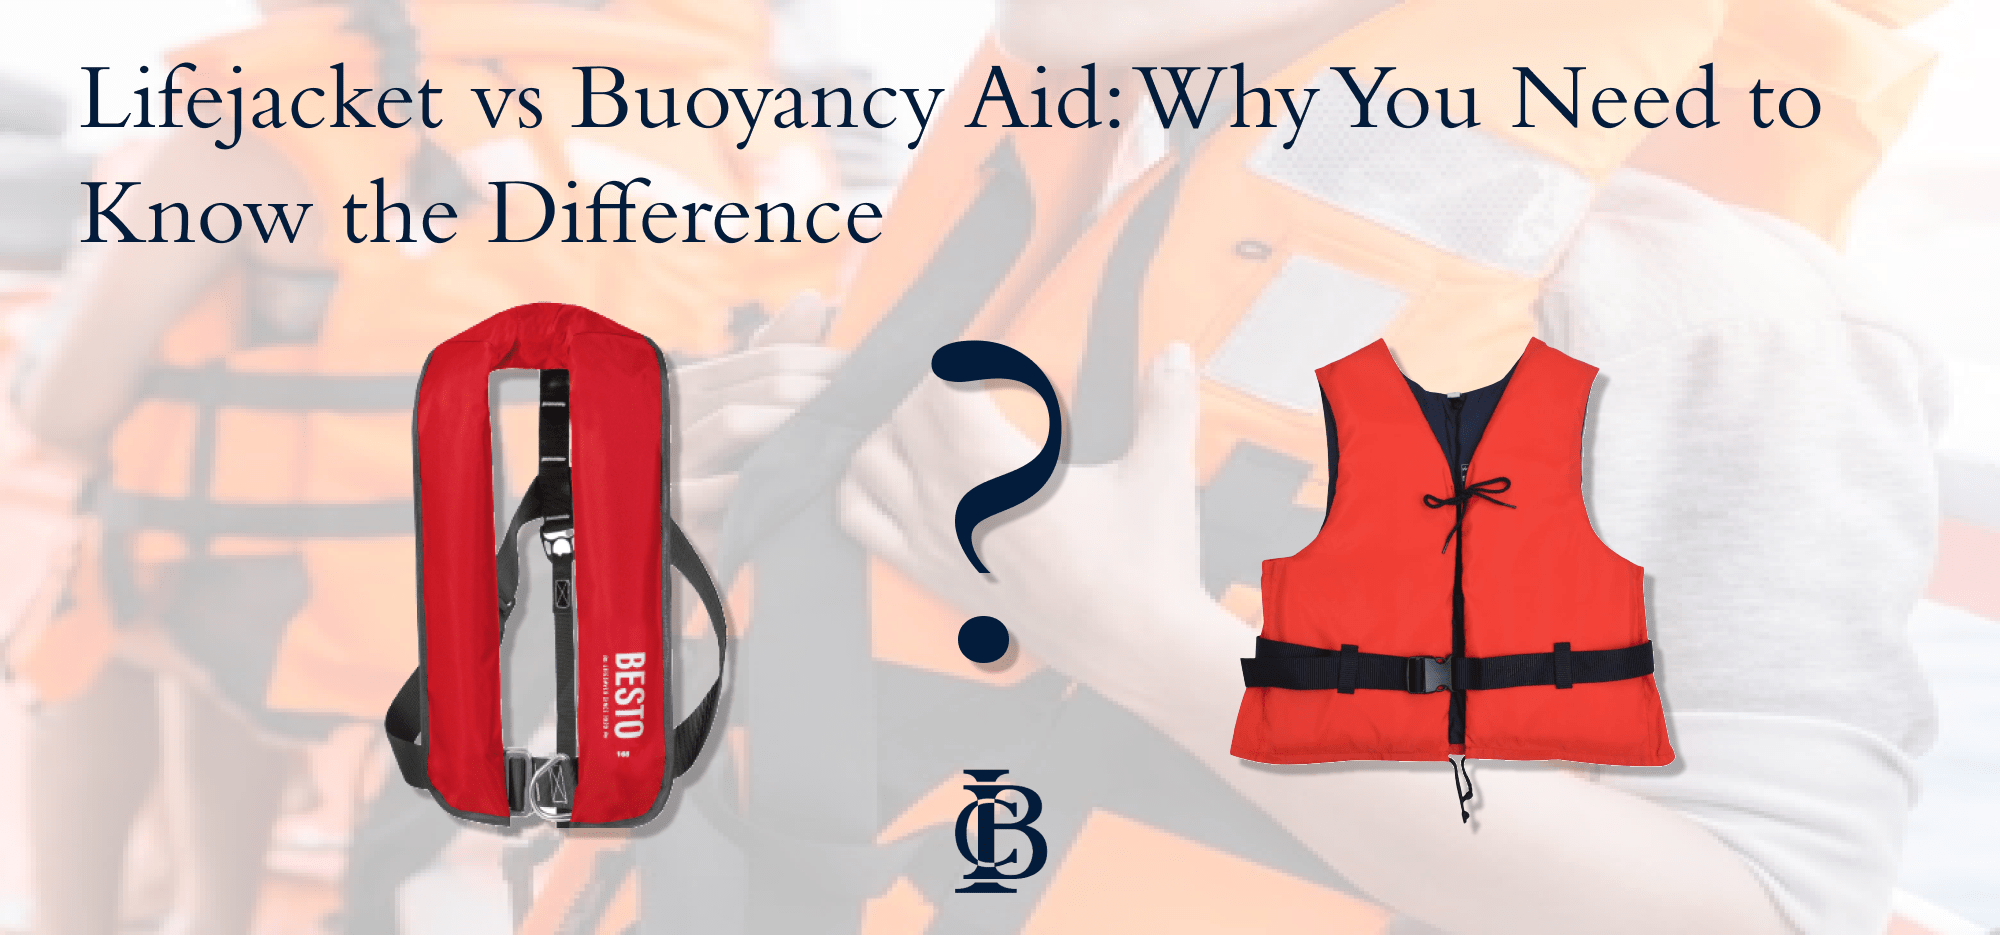 Lifejacket vs Buoyancy Aid: Why You Should Know the Difference